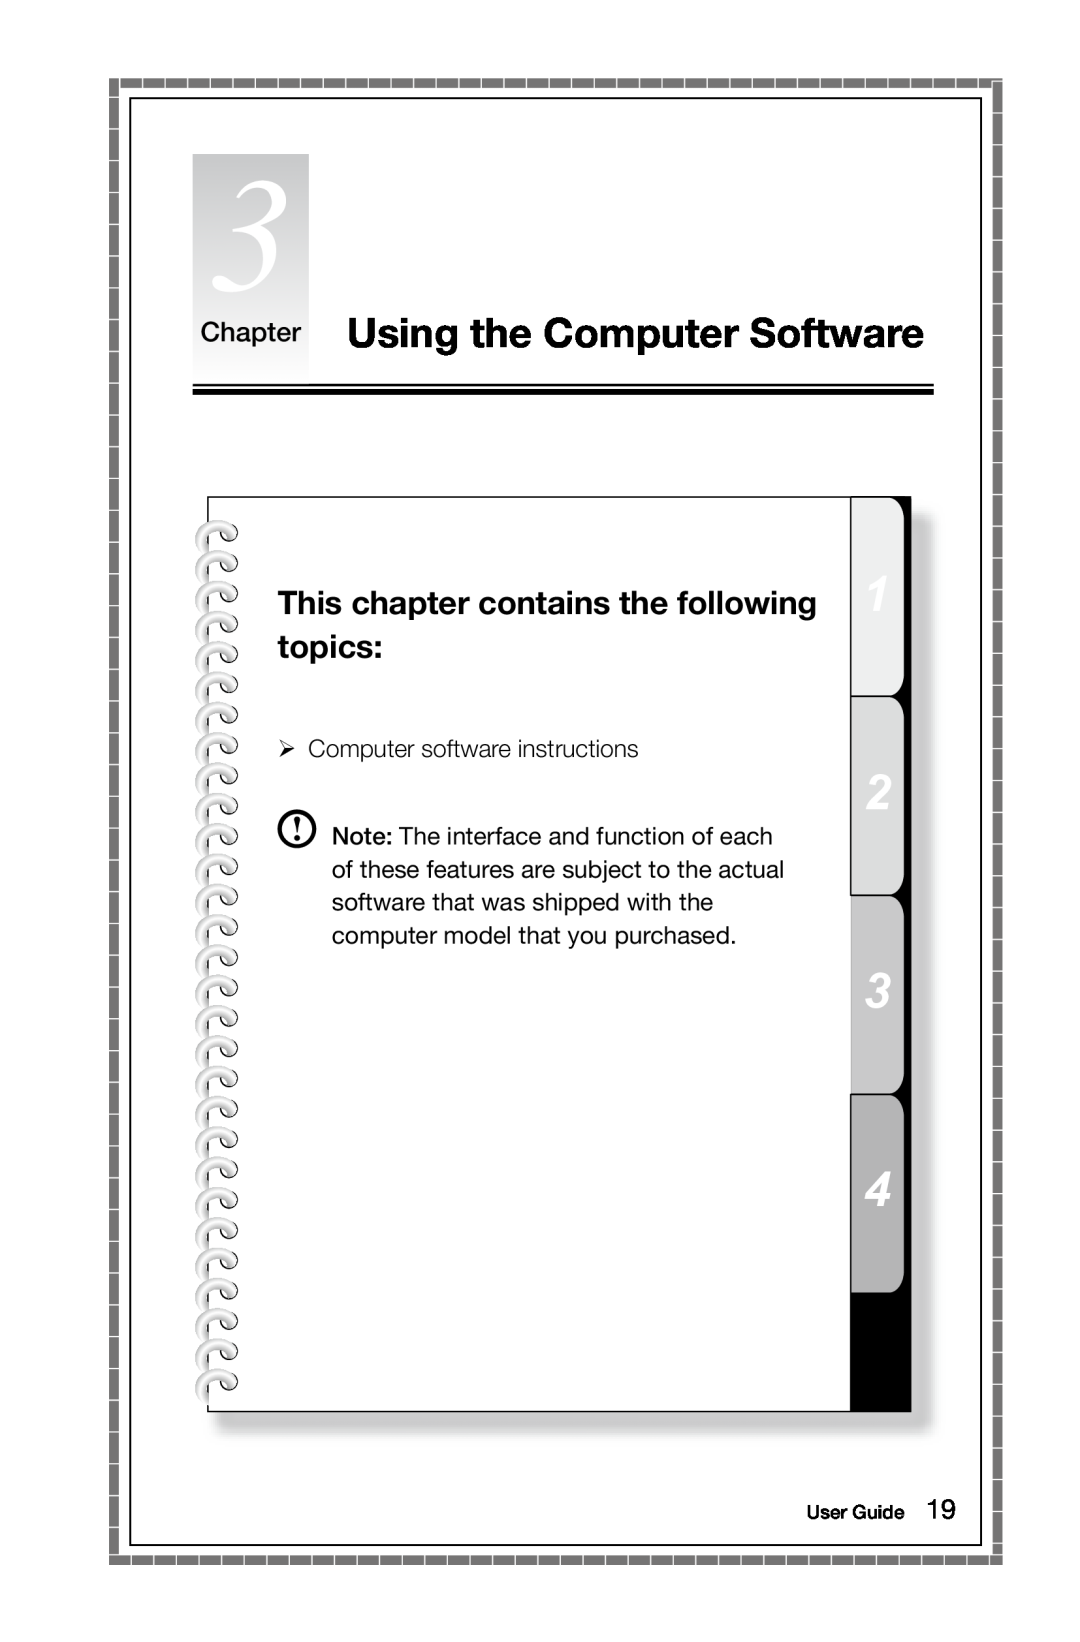 Lenovo K3 manual Chapter Using the Computer Software, This chapter contains the following topics, User Guide 